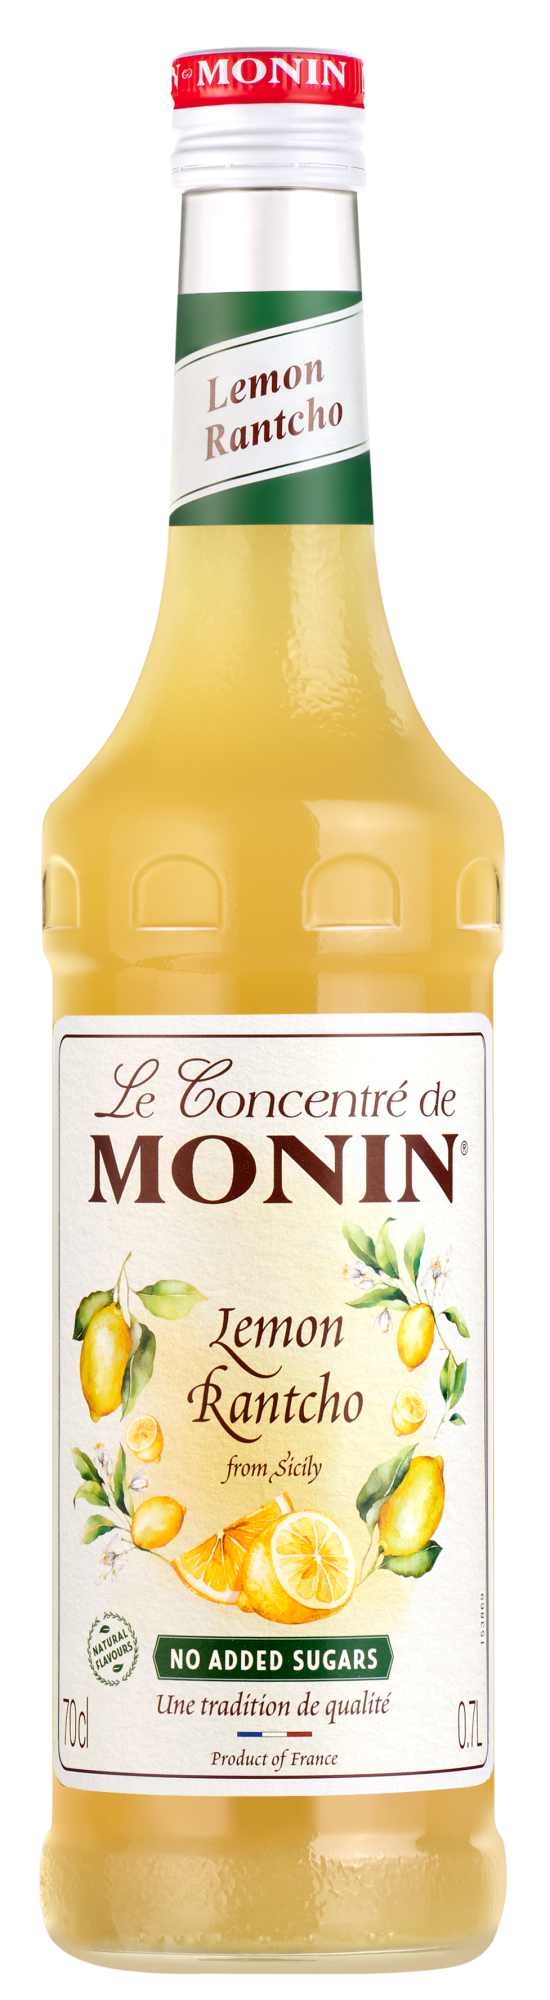 Buy MONIN Lemon Rantcho. It  is a fantastic alterative to fresh lemon juice to create delicious and innovative drinks.